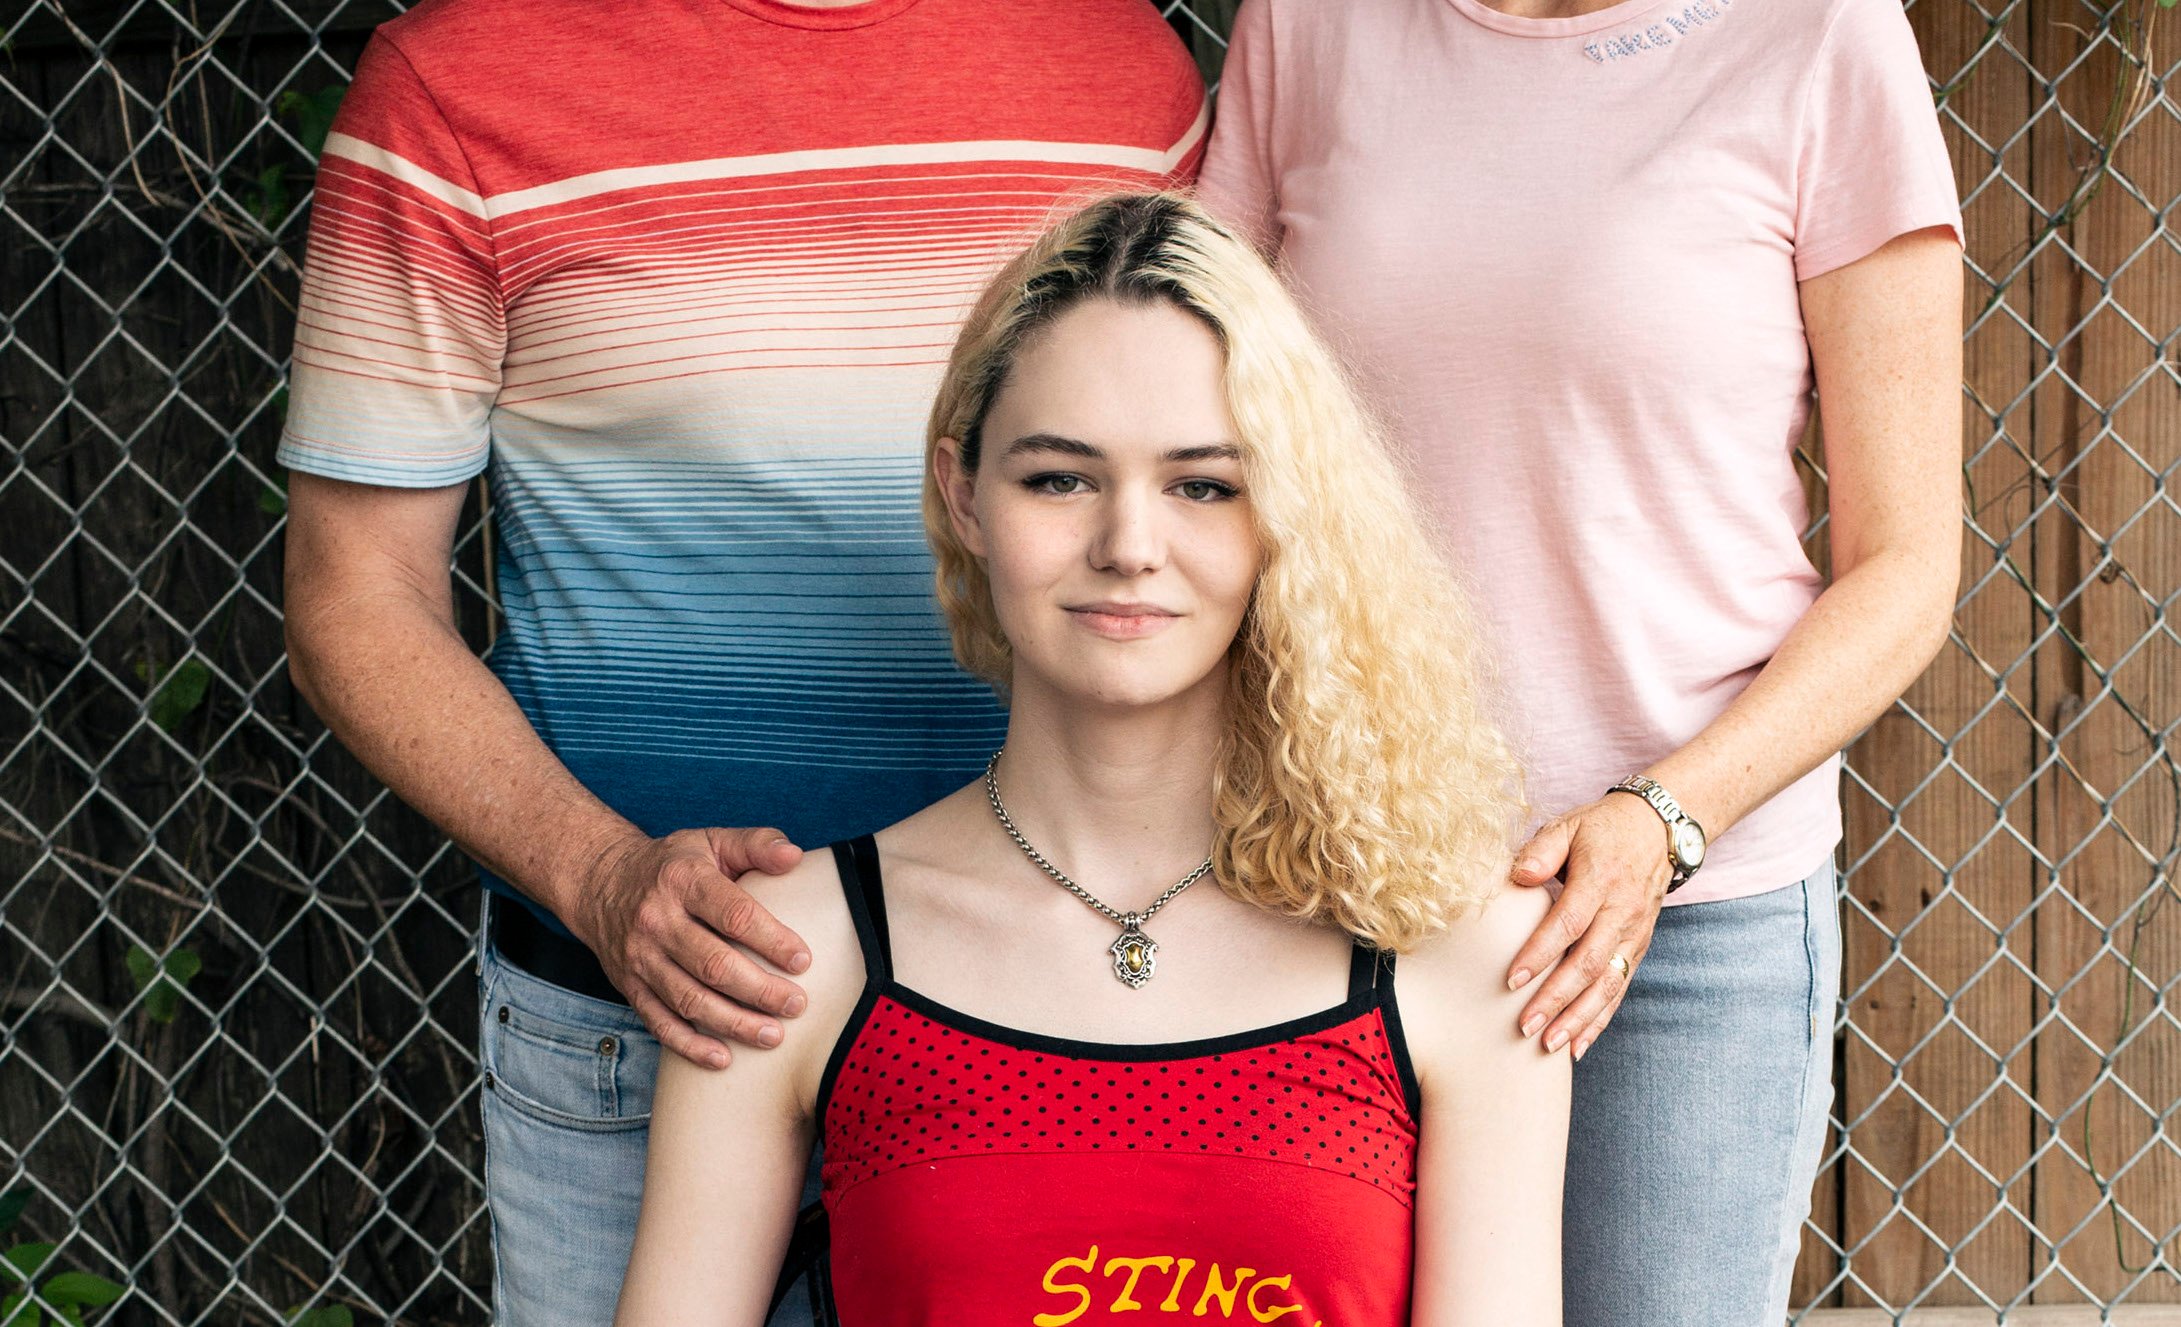 C smiles and looks directly at the camera. They have wavy blonde hair with dark roots showing and are wearing a red tank top with a cartoon bee on it, along with blue jeans. C's parents stand behind, each with a hand on C's shoulder.